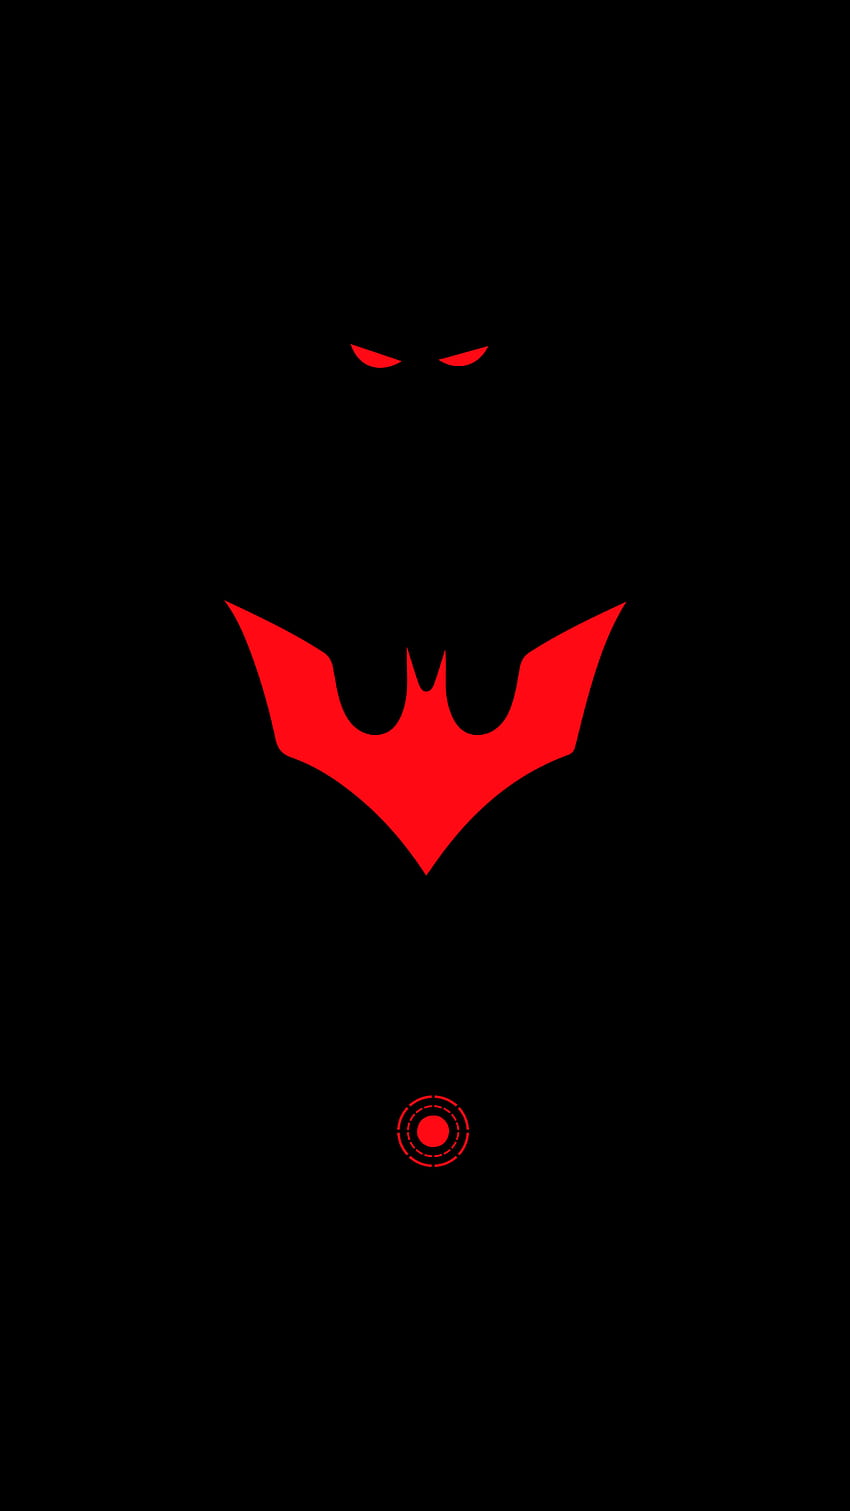 The Red Shadow of Batman () – For Tech HD phone wallpaper